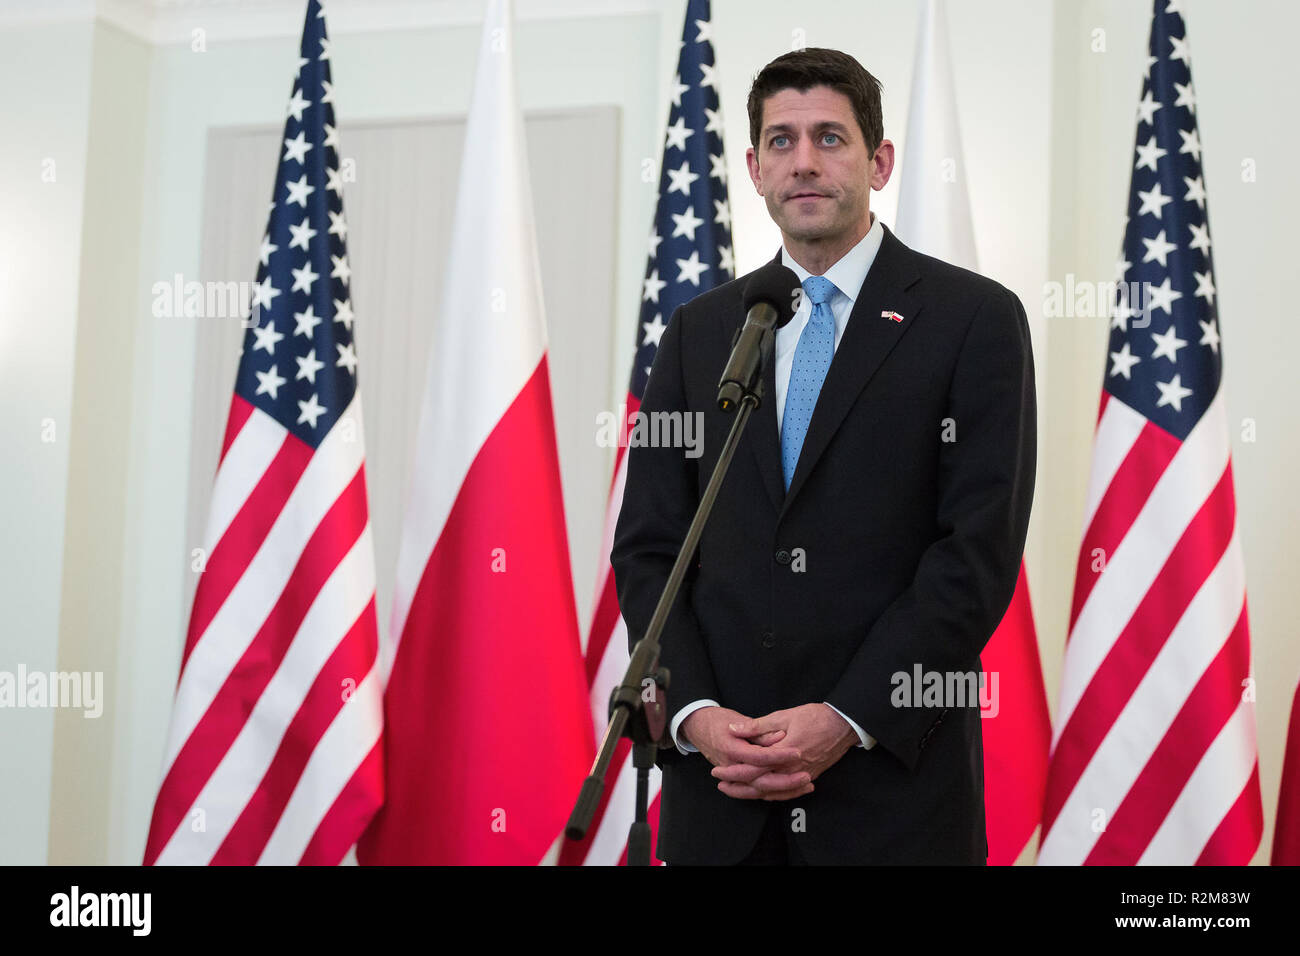 Speaker of the United States House of Representatives Paul Ryan speaks to the media after a meeting with Polish President Andrzej Duda in the Presidential Palace in Warsaw, Poland on 21 April 2017 Stock Photo